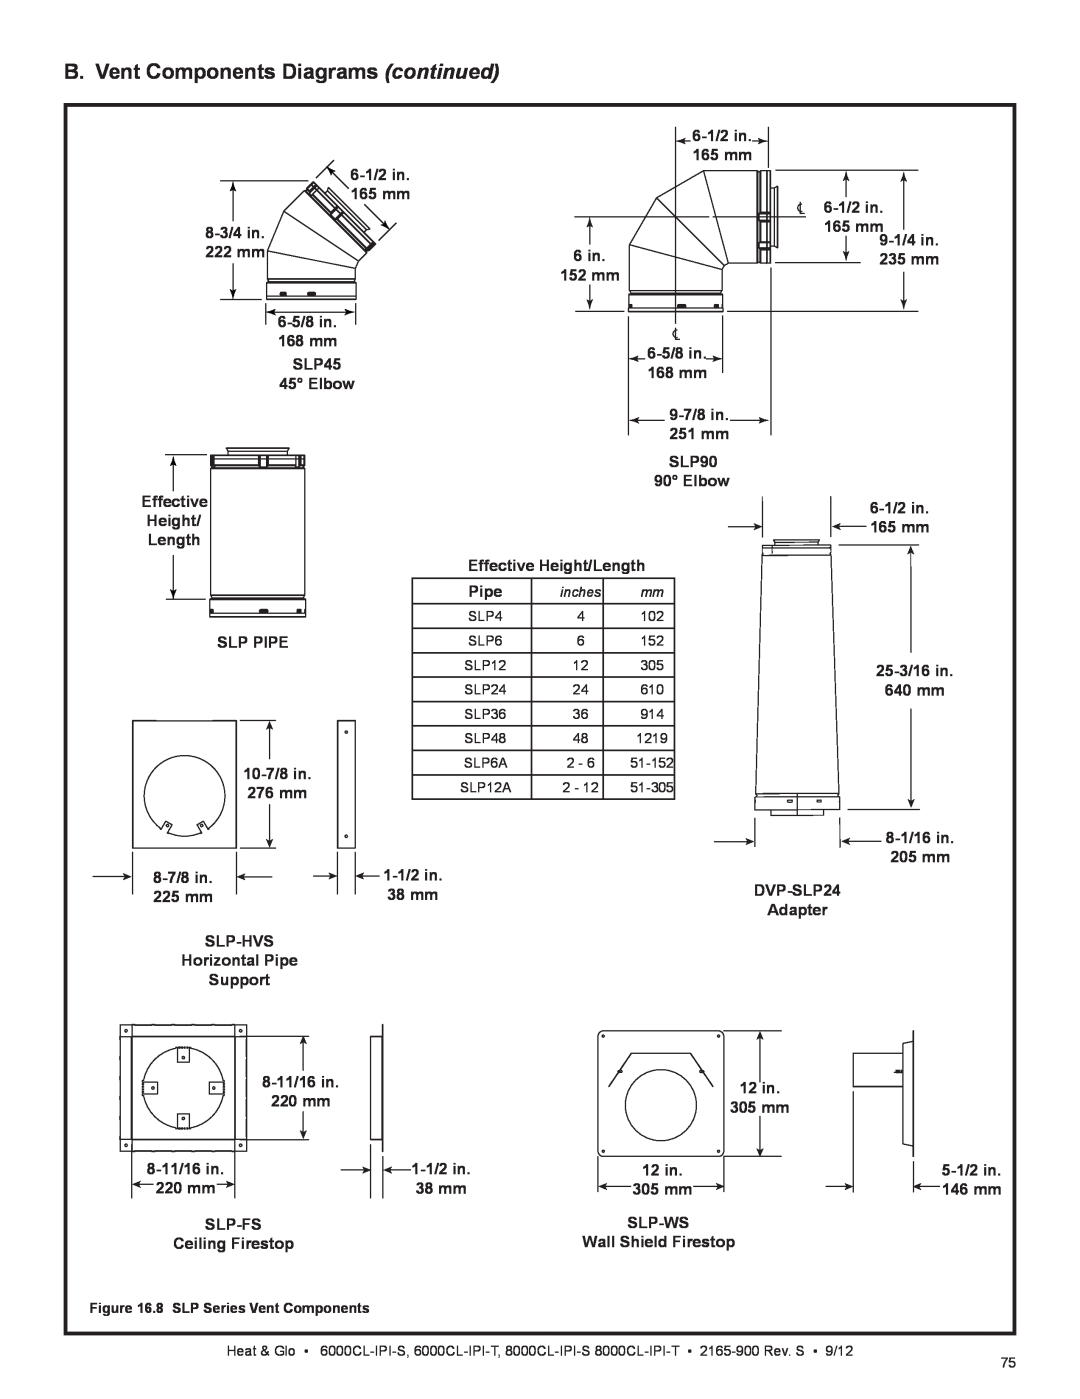 Heat & Glo LifeStyle 6000CL-IPI-T, 8000CL-IPI-S, 8000CL-IPI-T, 6000CL-IPI-S B. Vent Components Diagrams continued, 6-1/2in 